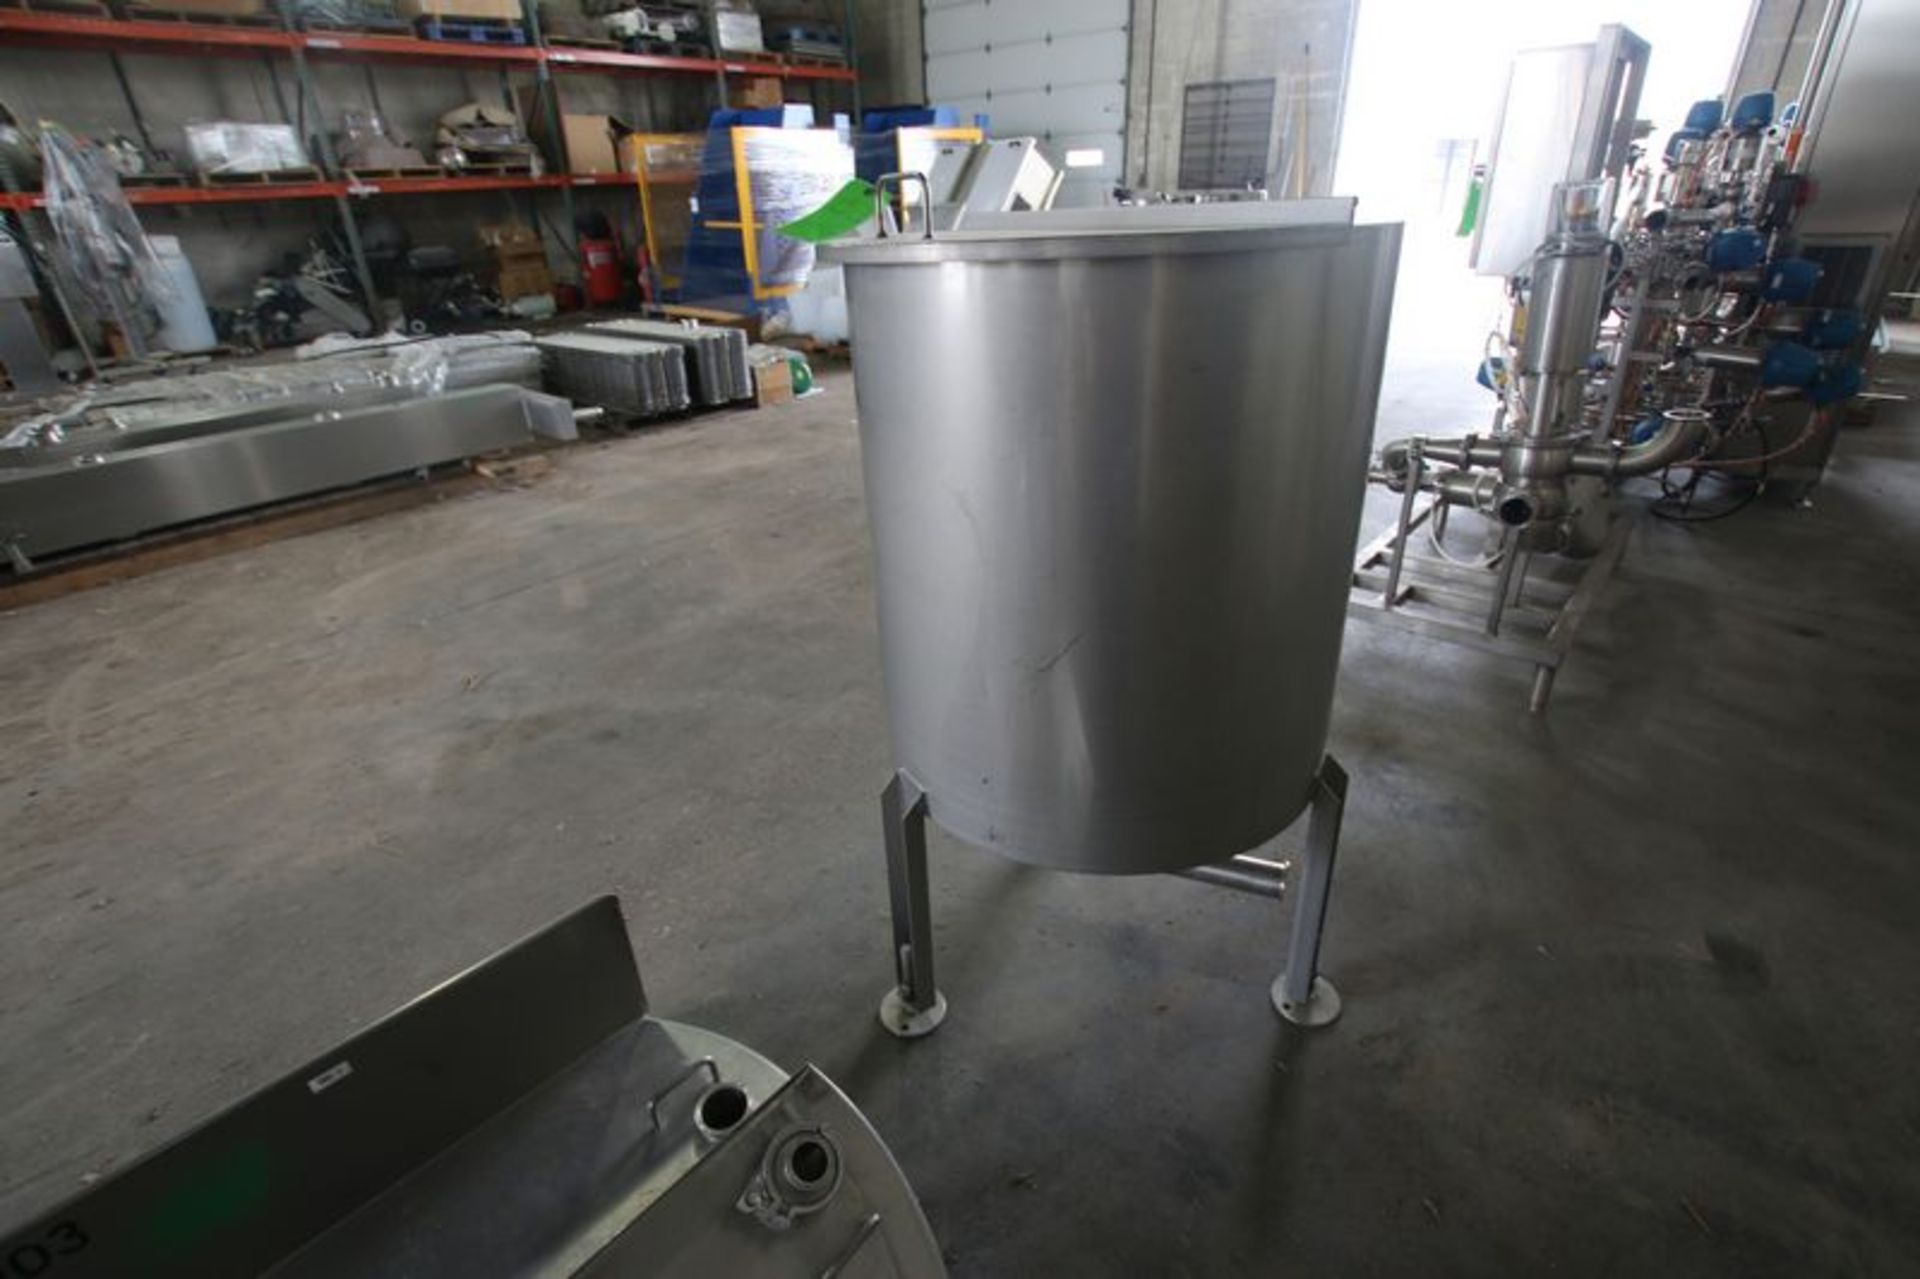 S/S Hinged Lid Storage Tank. Approx Dims: 33" L x 30" Dia***Located in Truck Wash Bay - Image 3 of 4